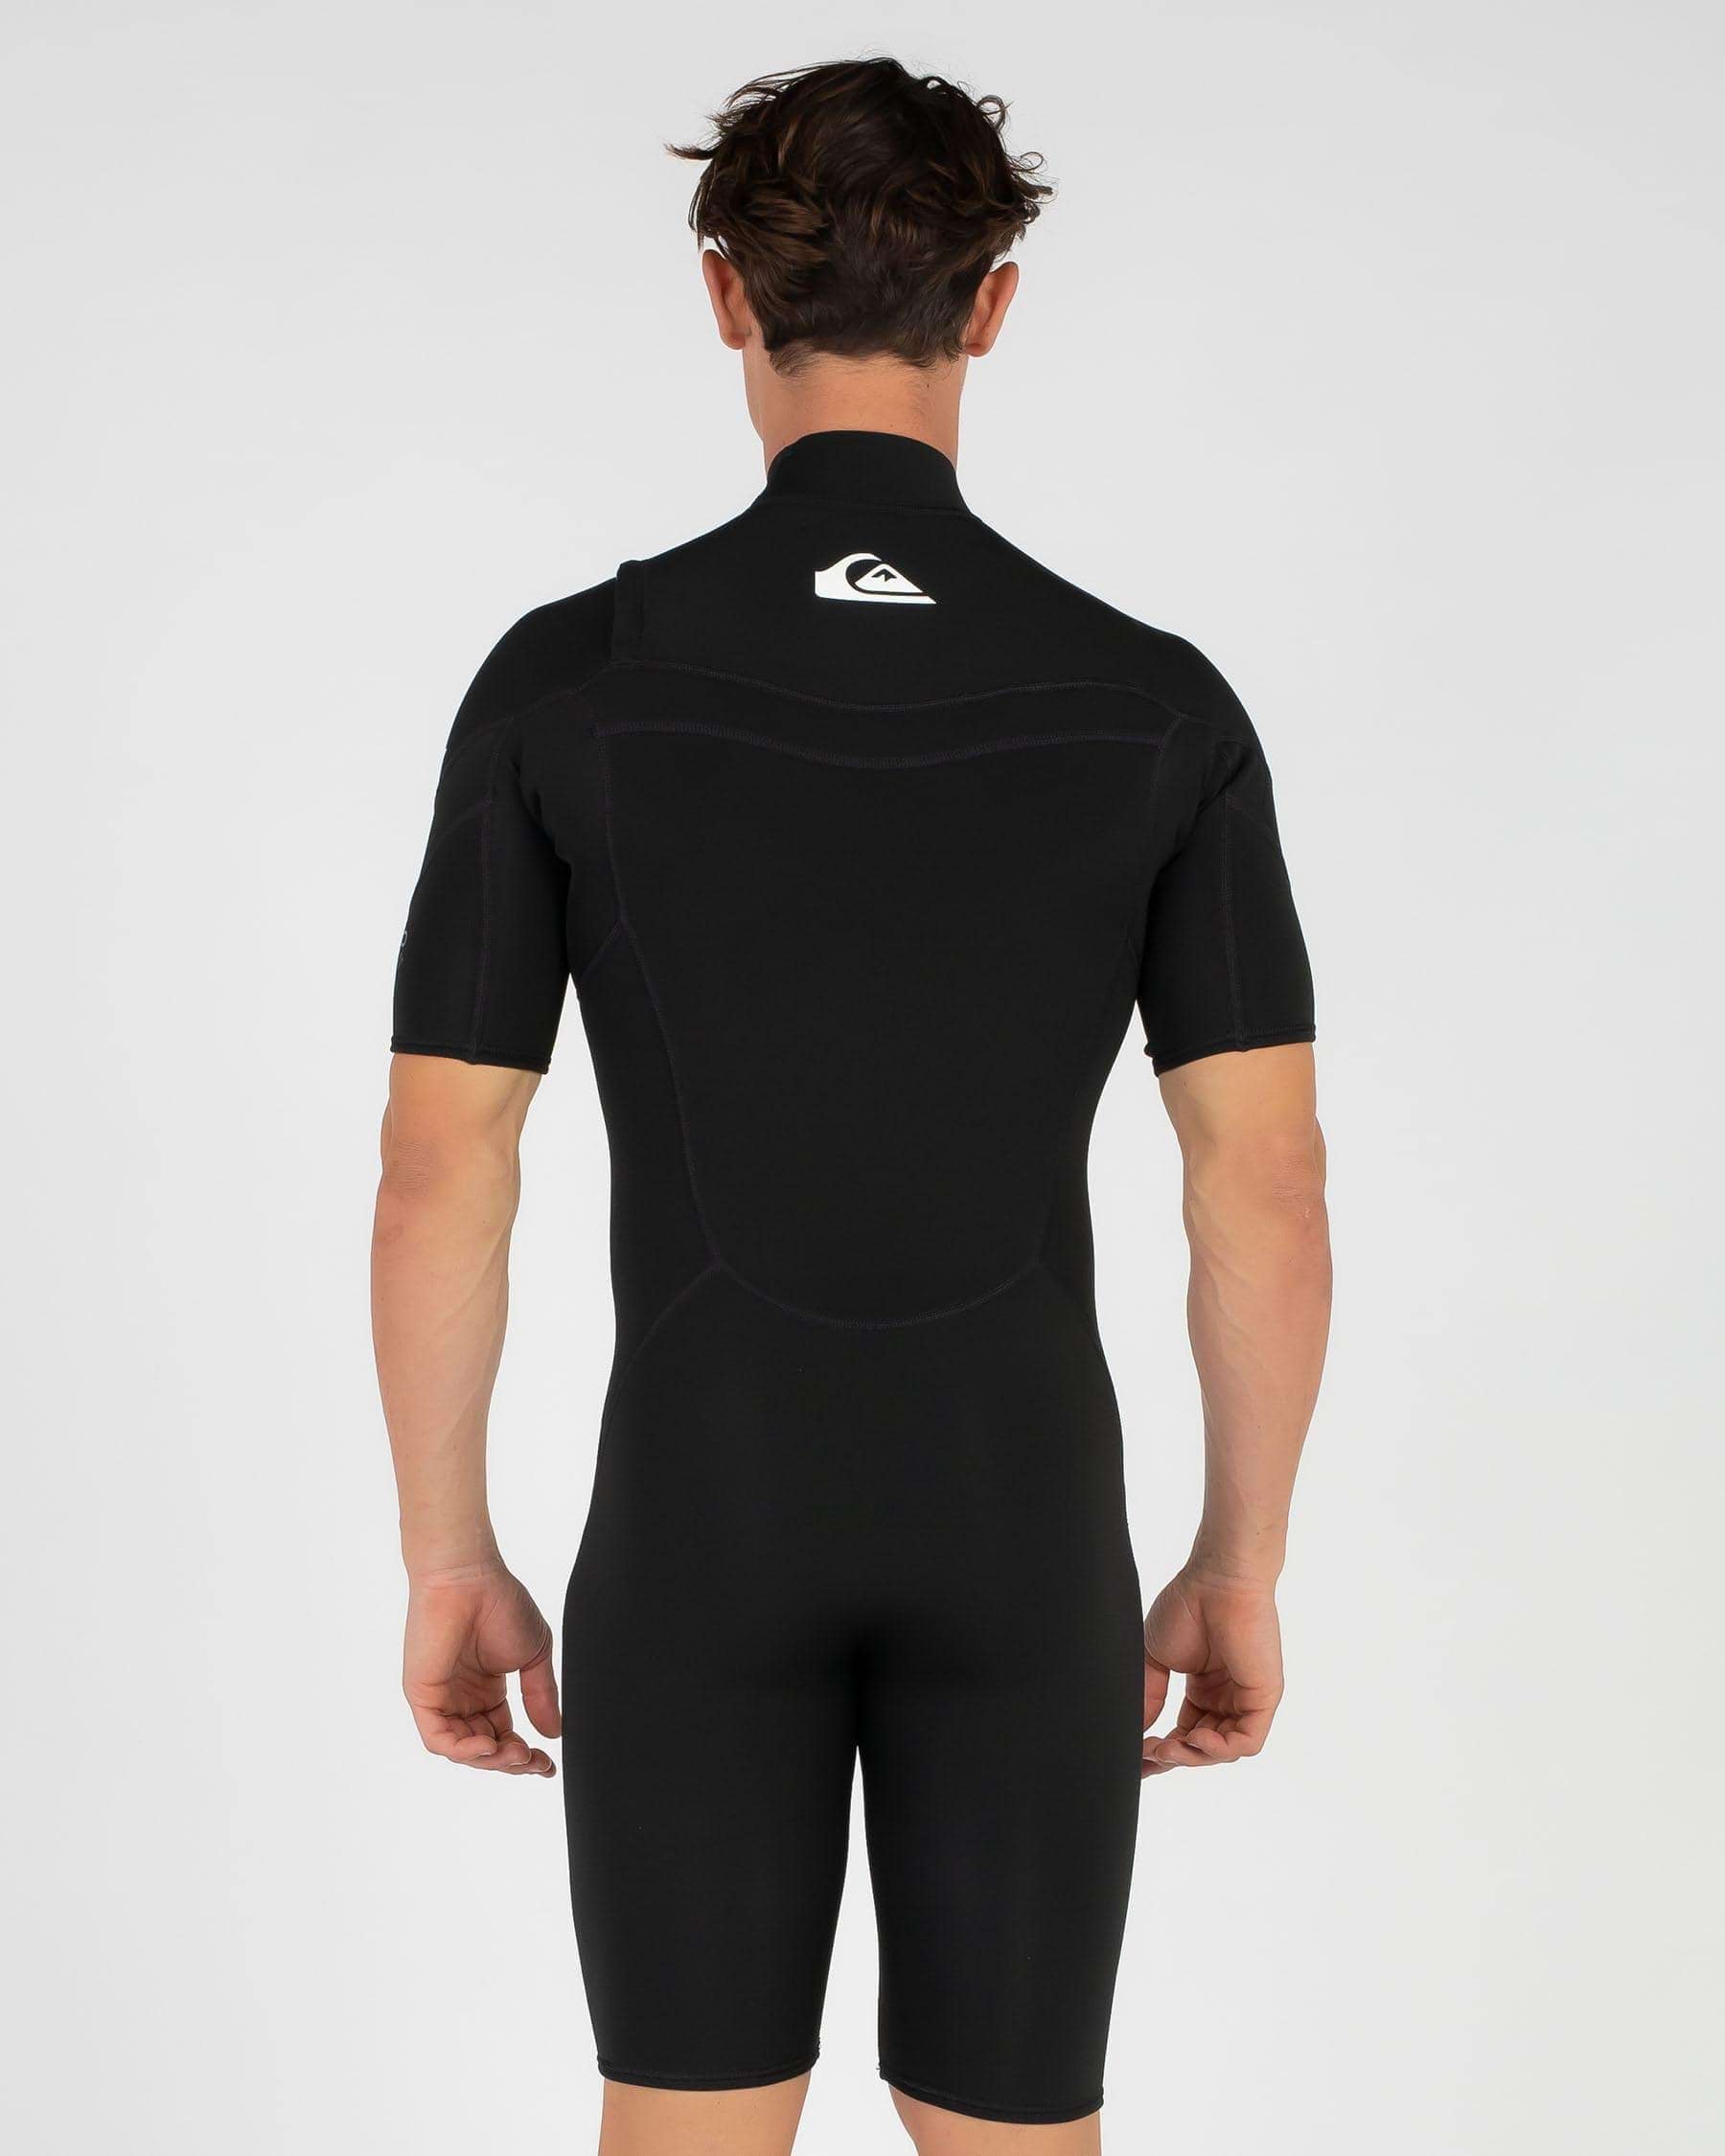 Quiksilver Syncro Short Sleeve Spring Suit In Black/white - Fast ...